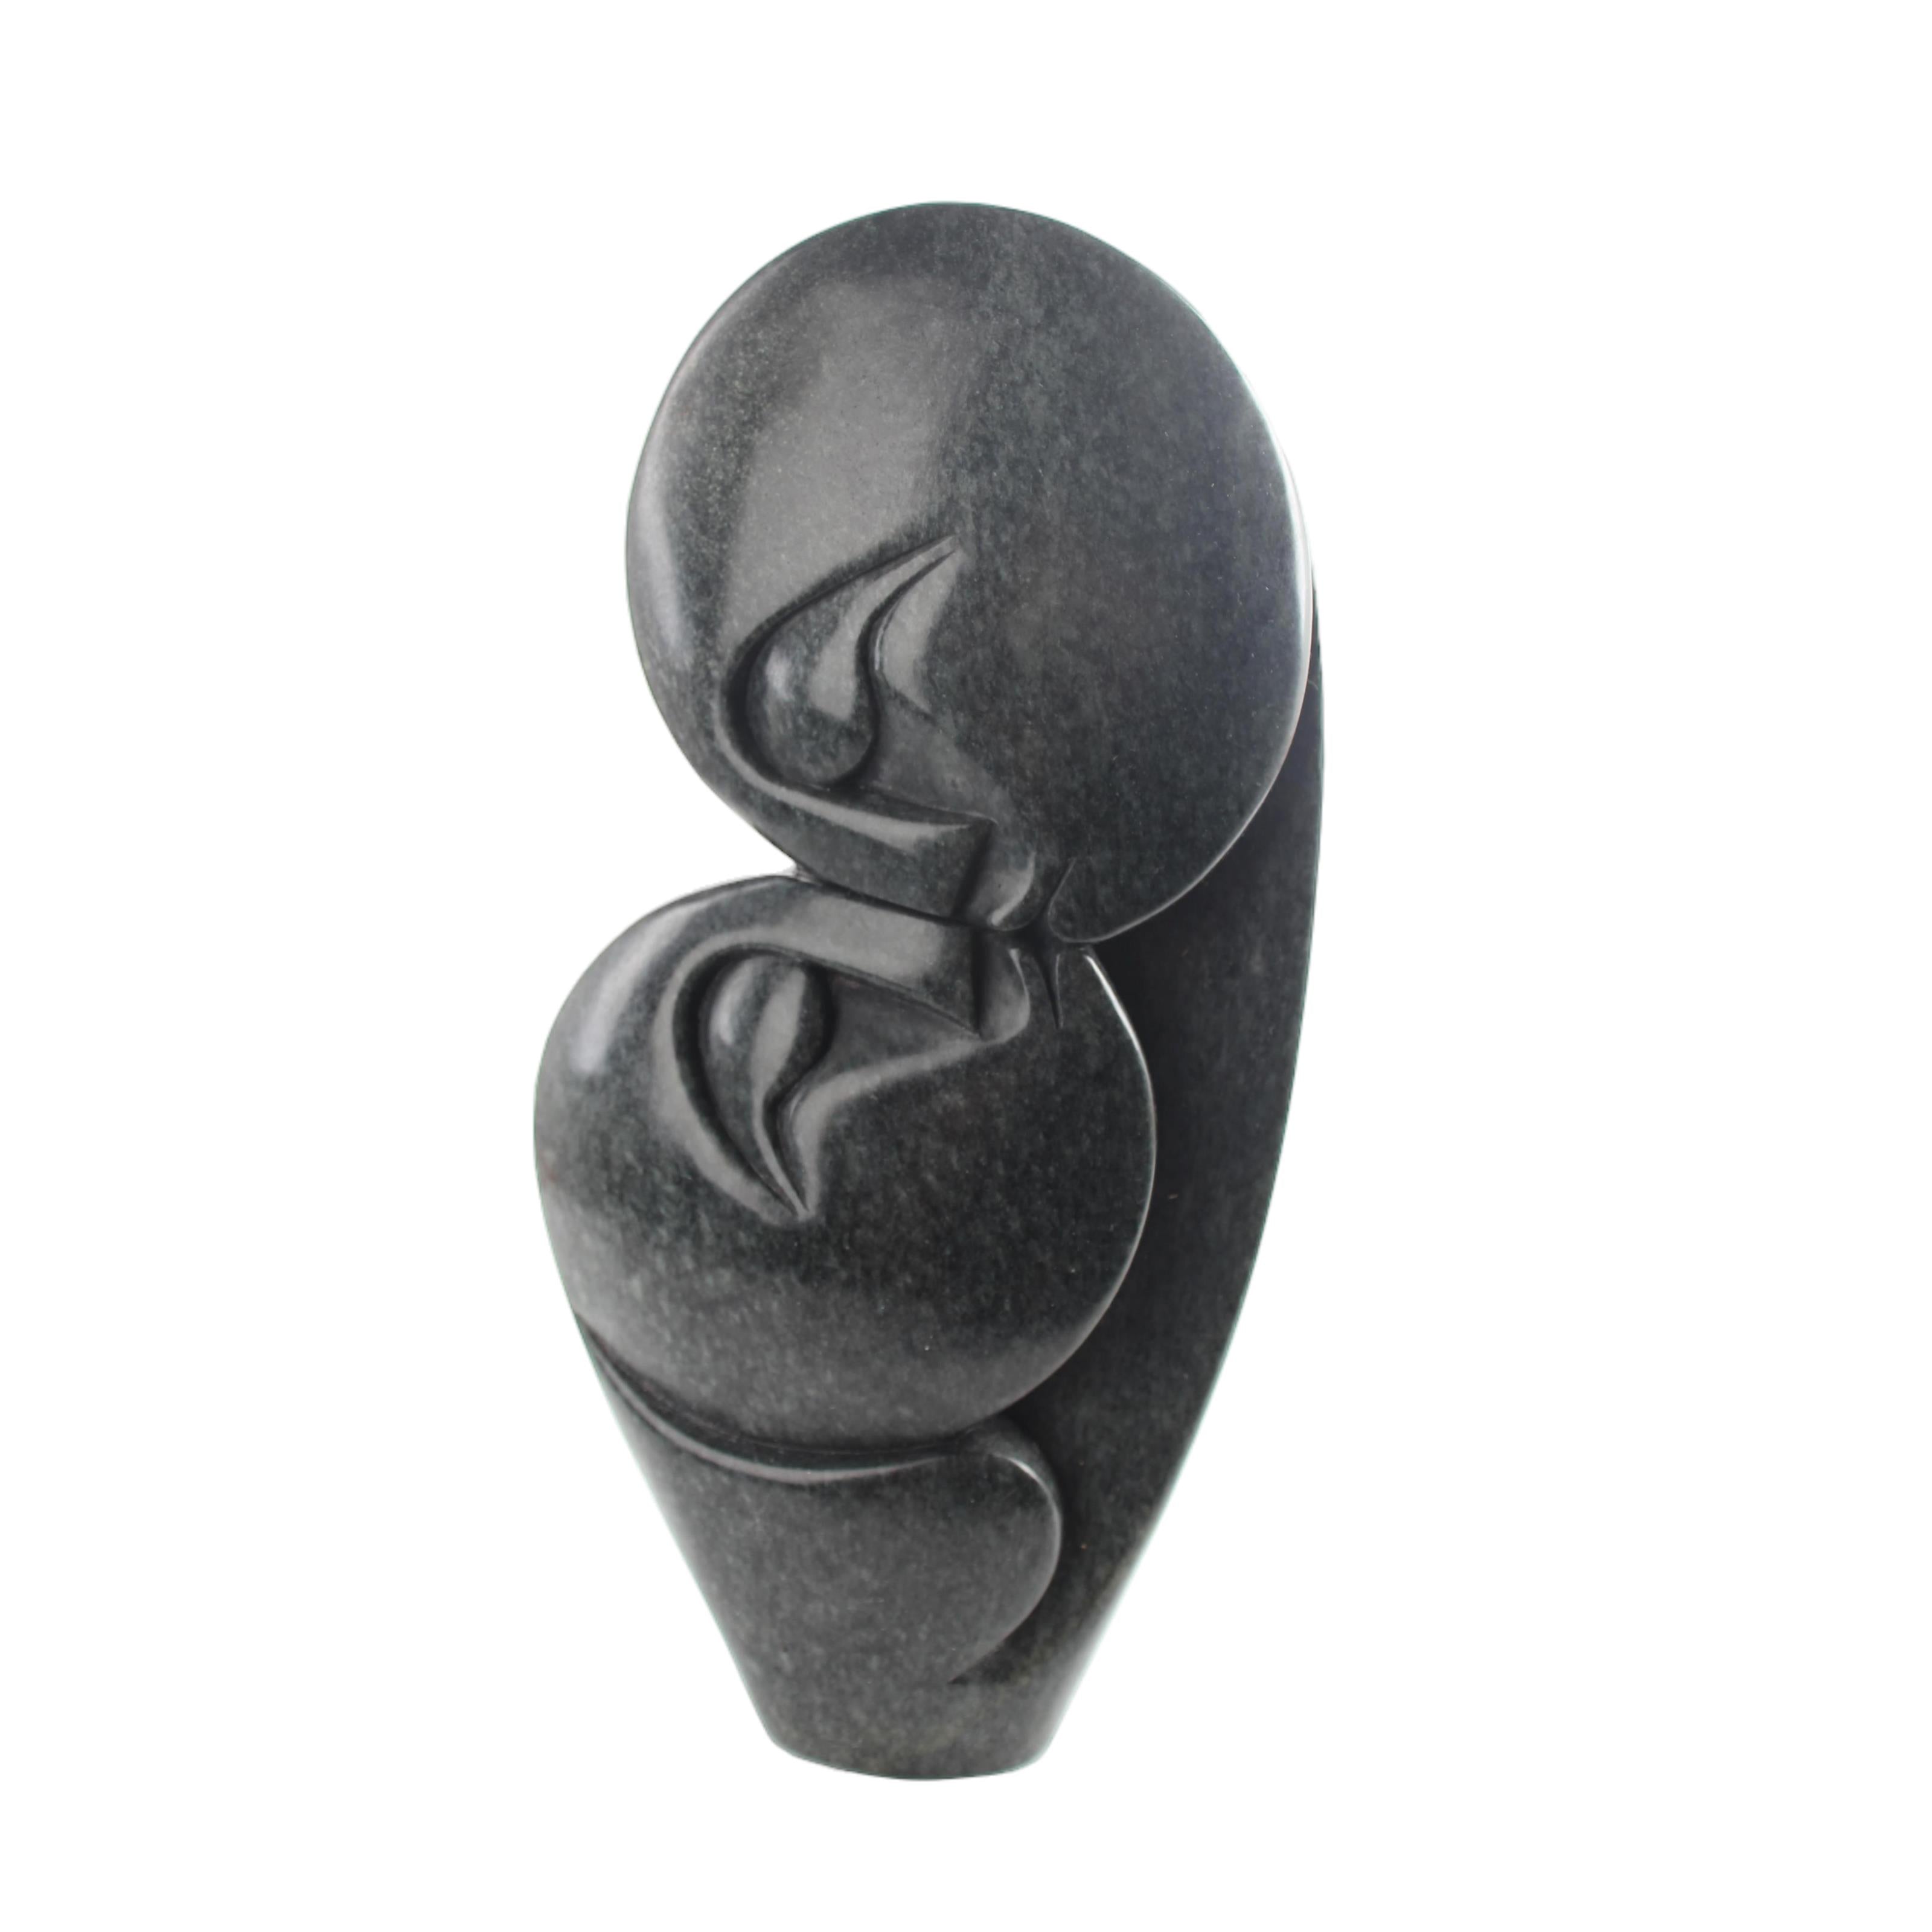 Shona Tribe Serpentine Stone Lovers ~10.2" Tall - Lovers